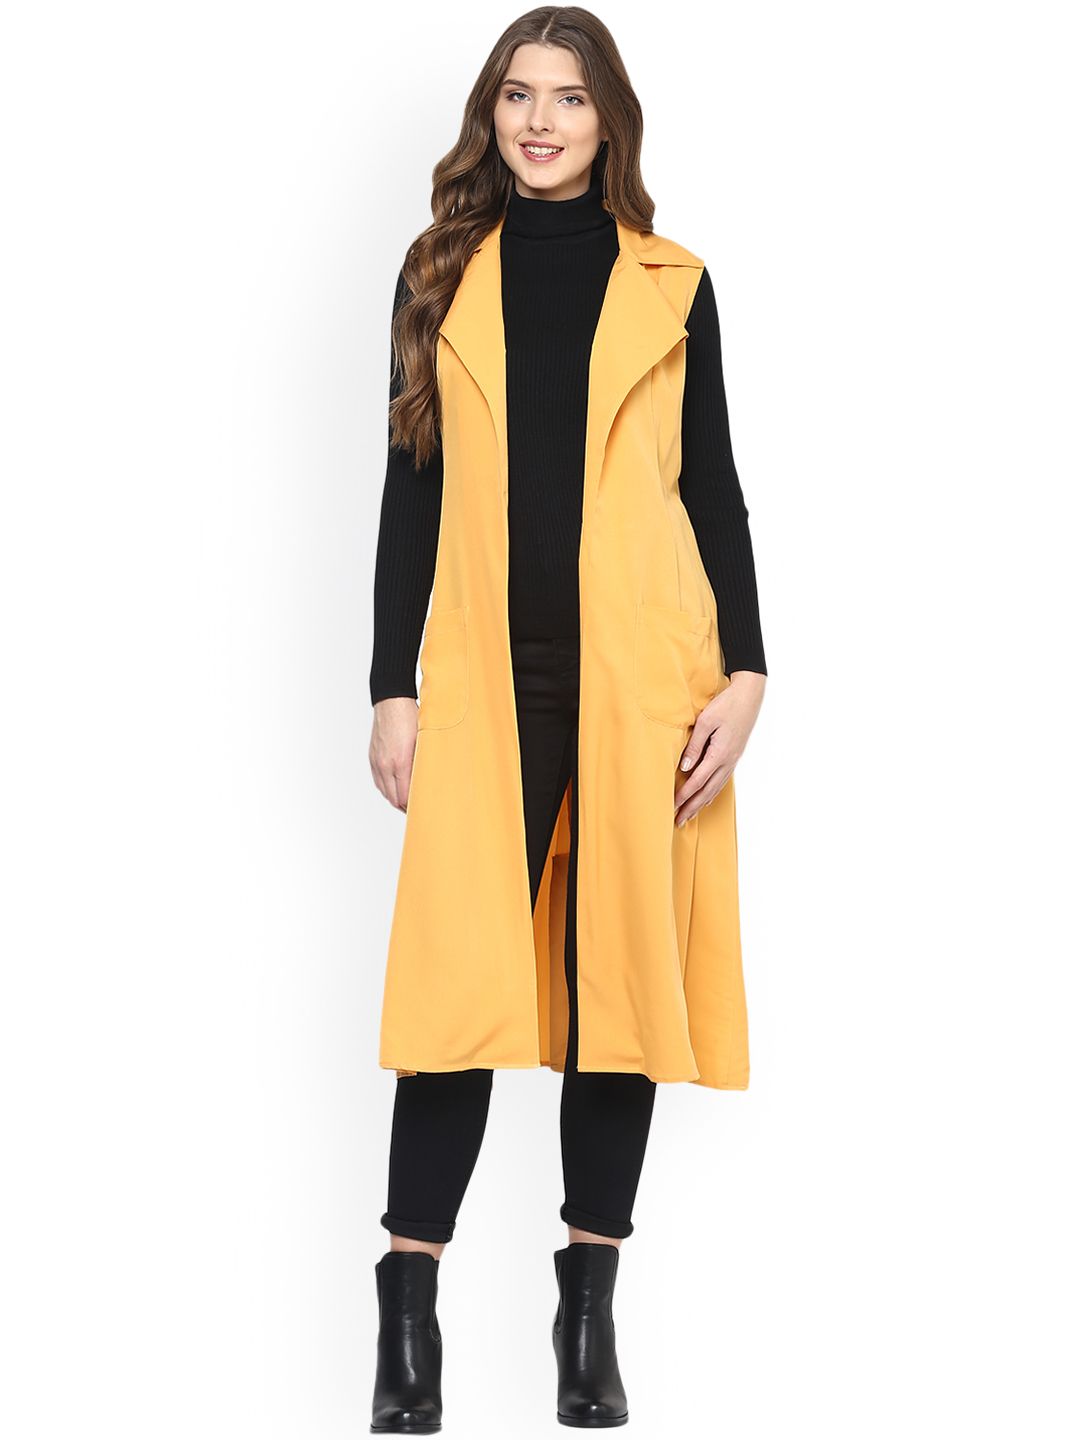 MABISH by Sonal Jain Women Yellow Solid Open Front Shrug Price in India